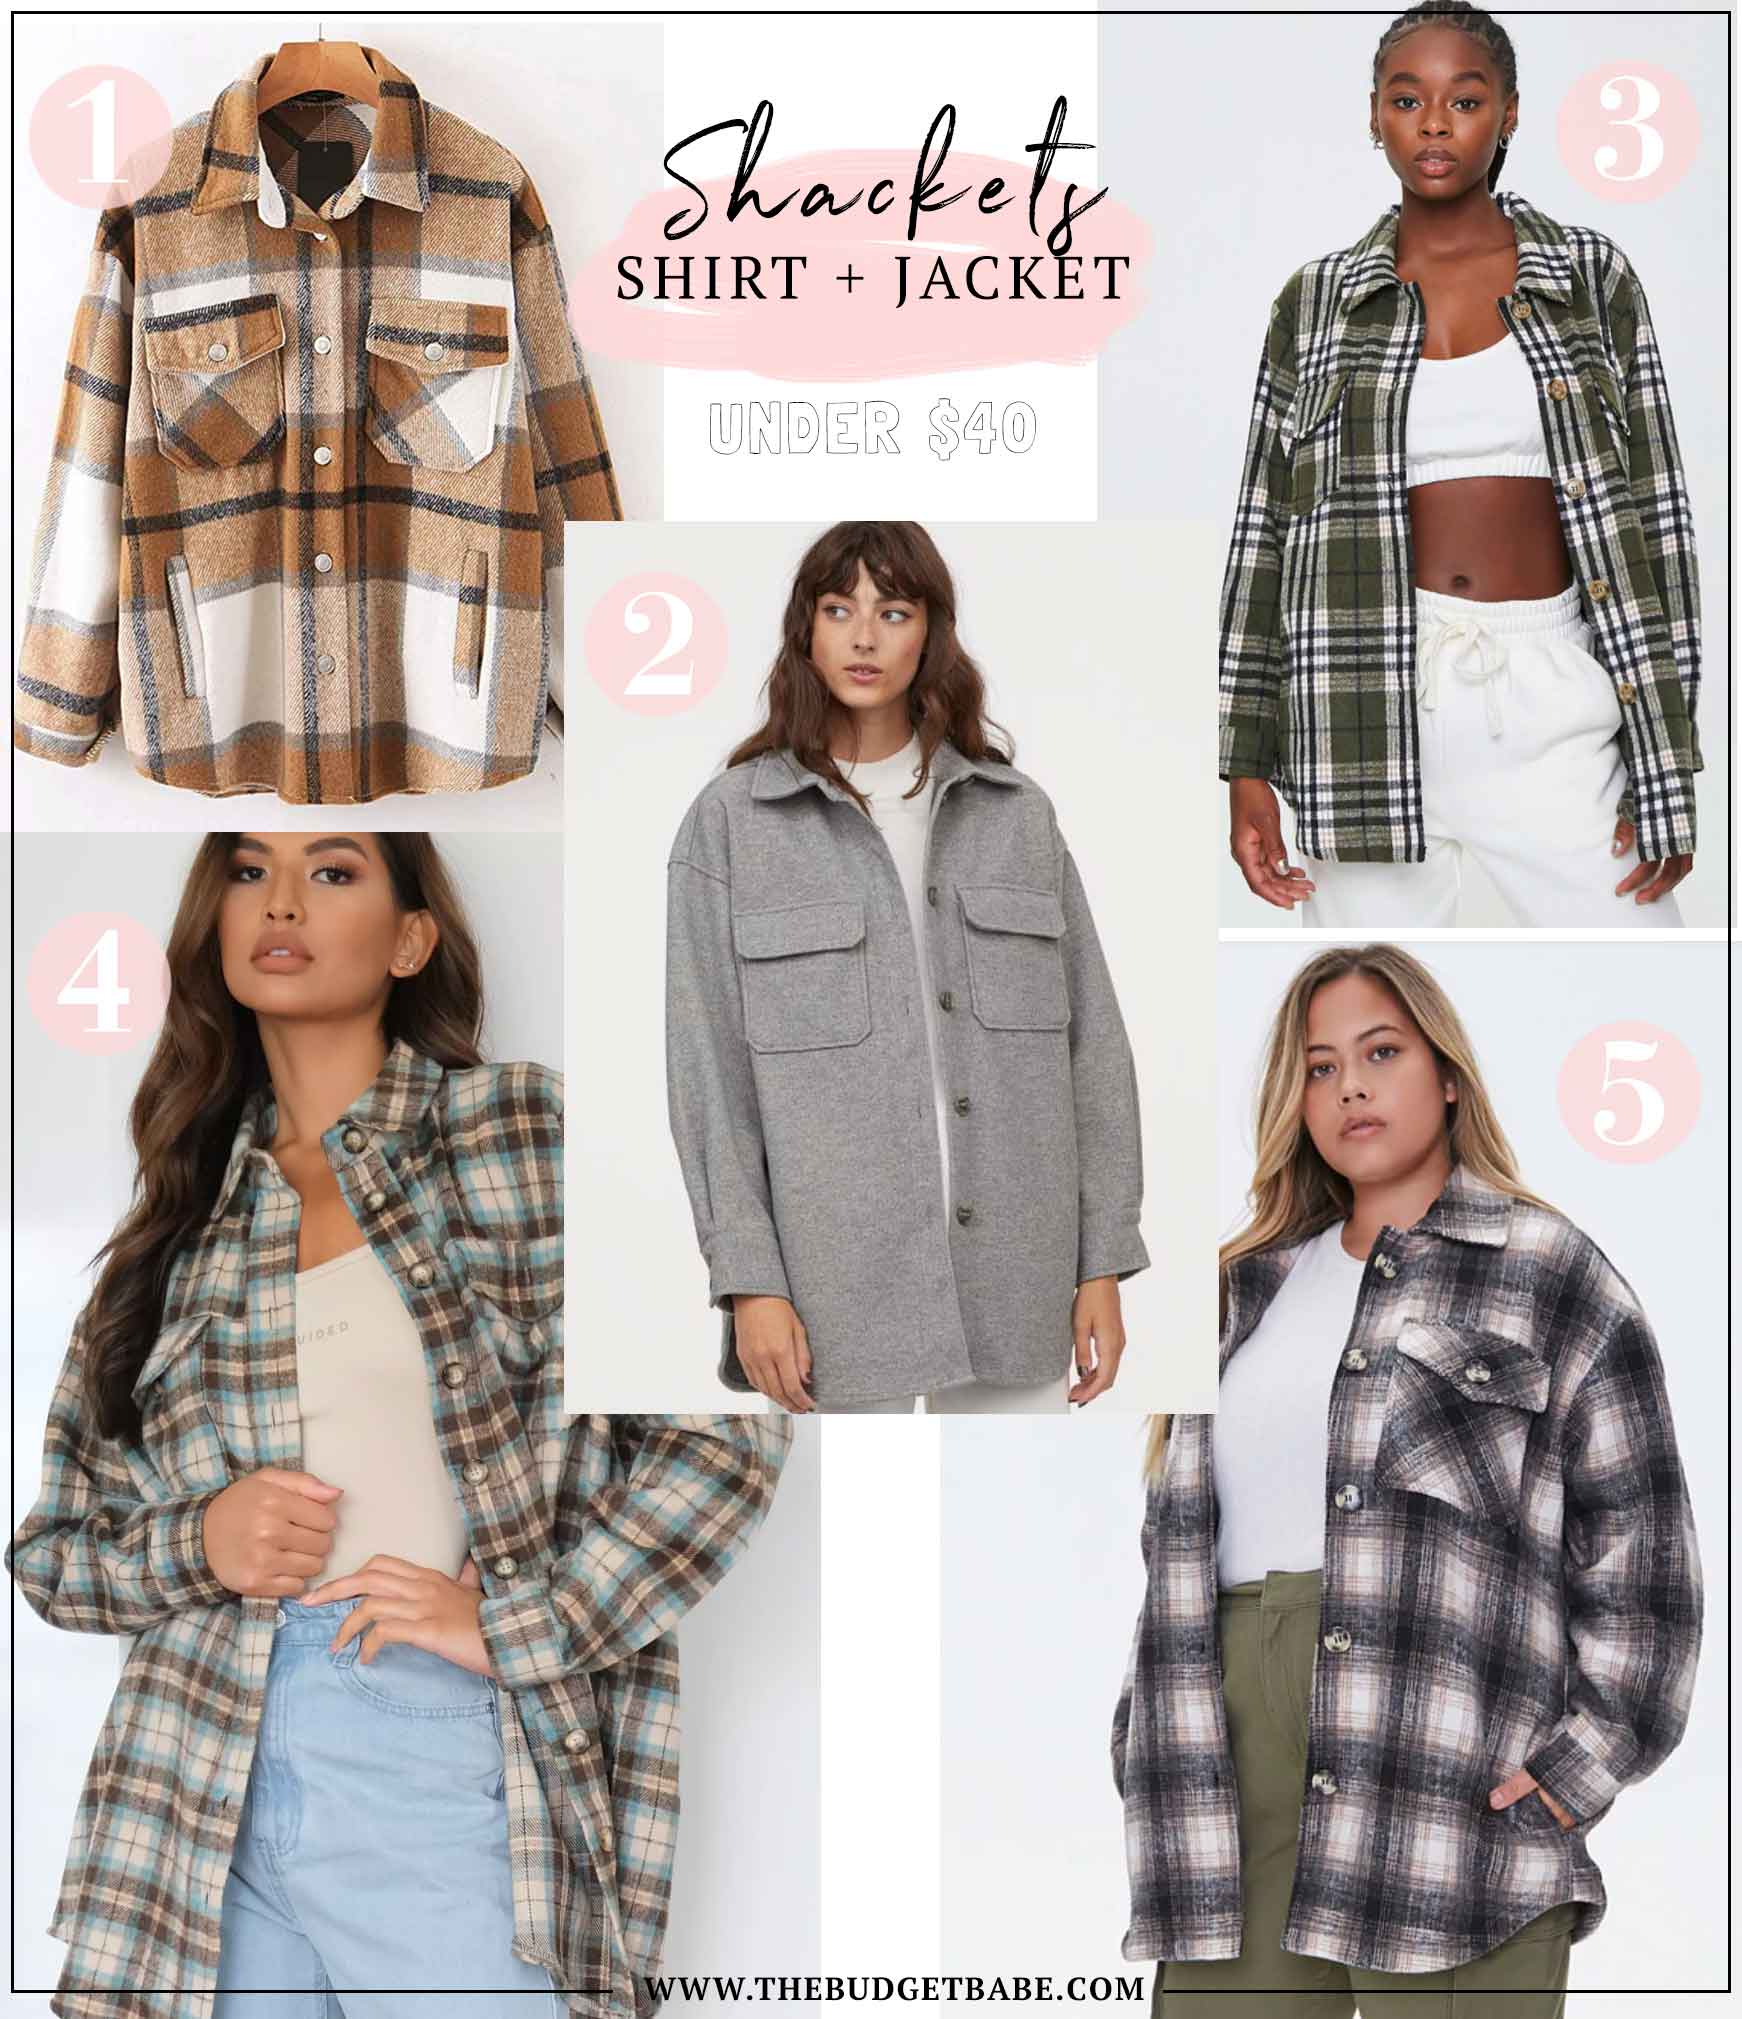 Try the shacket trend! The best of both worlds, under $40